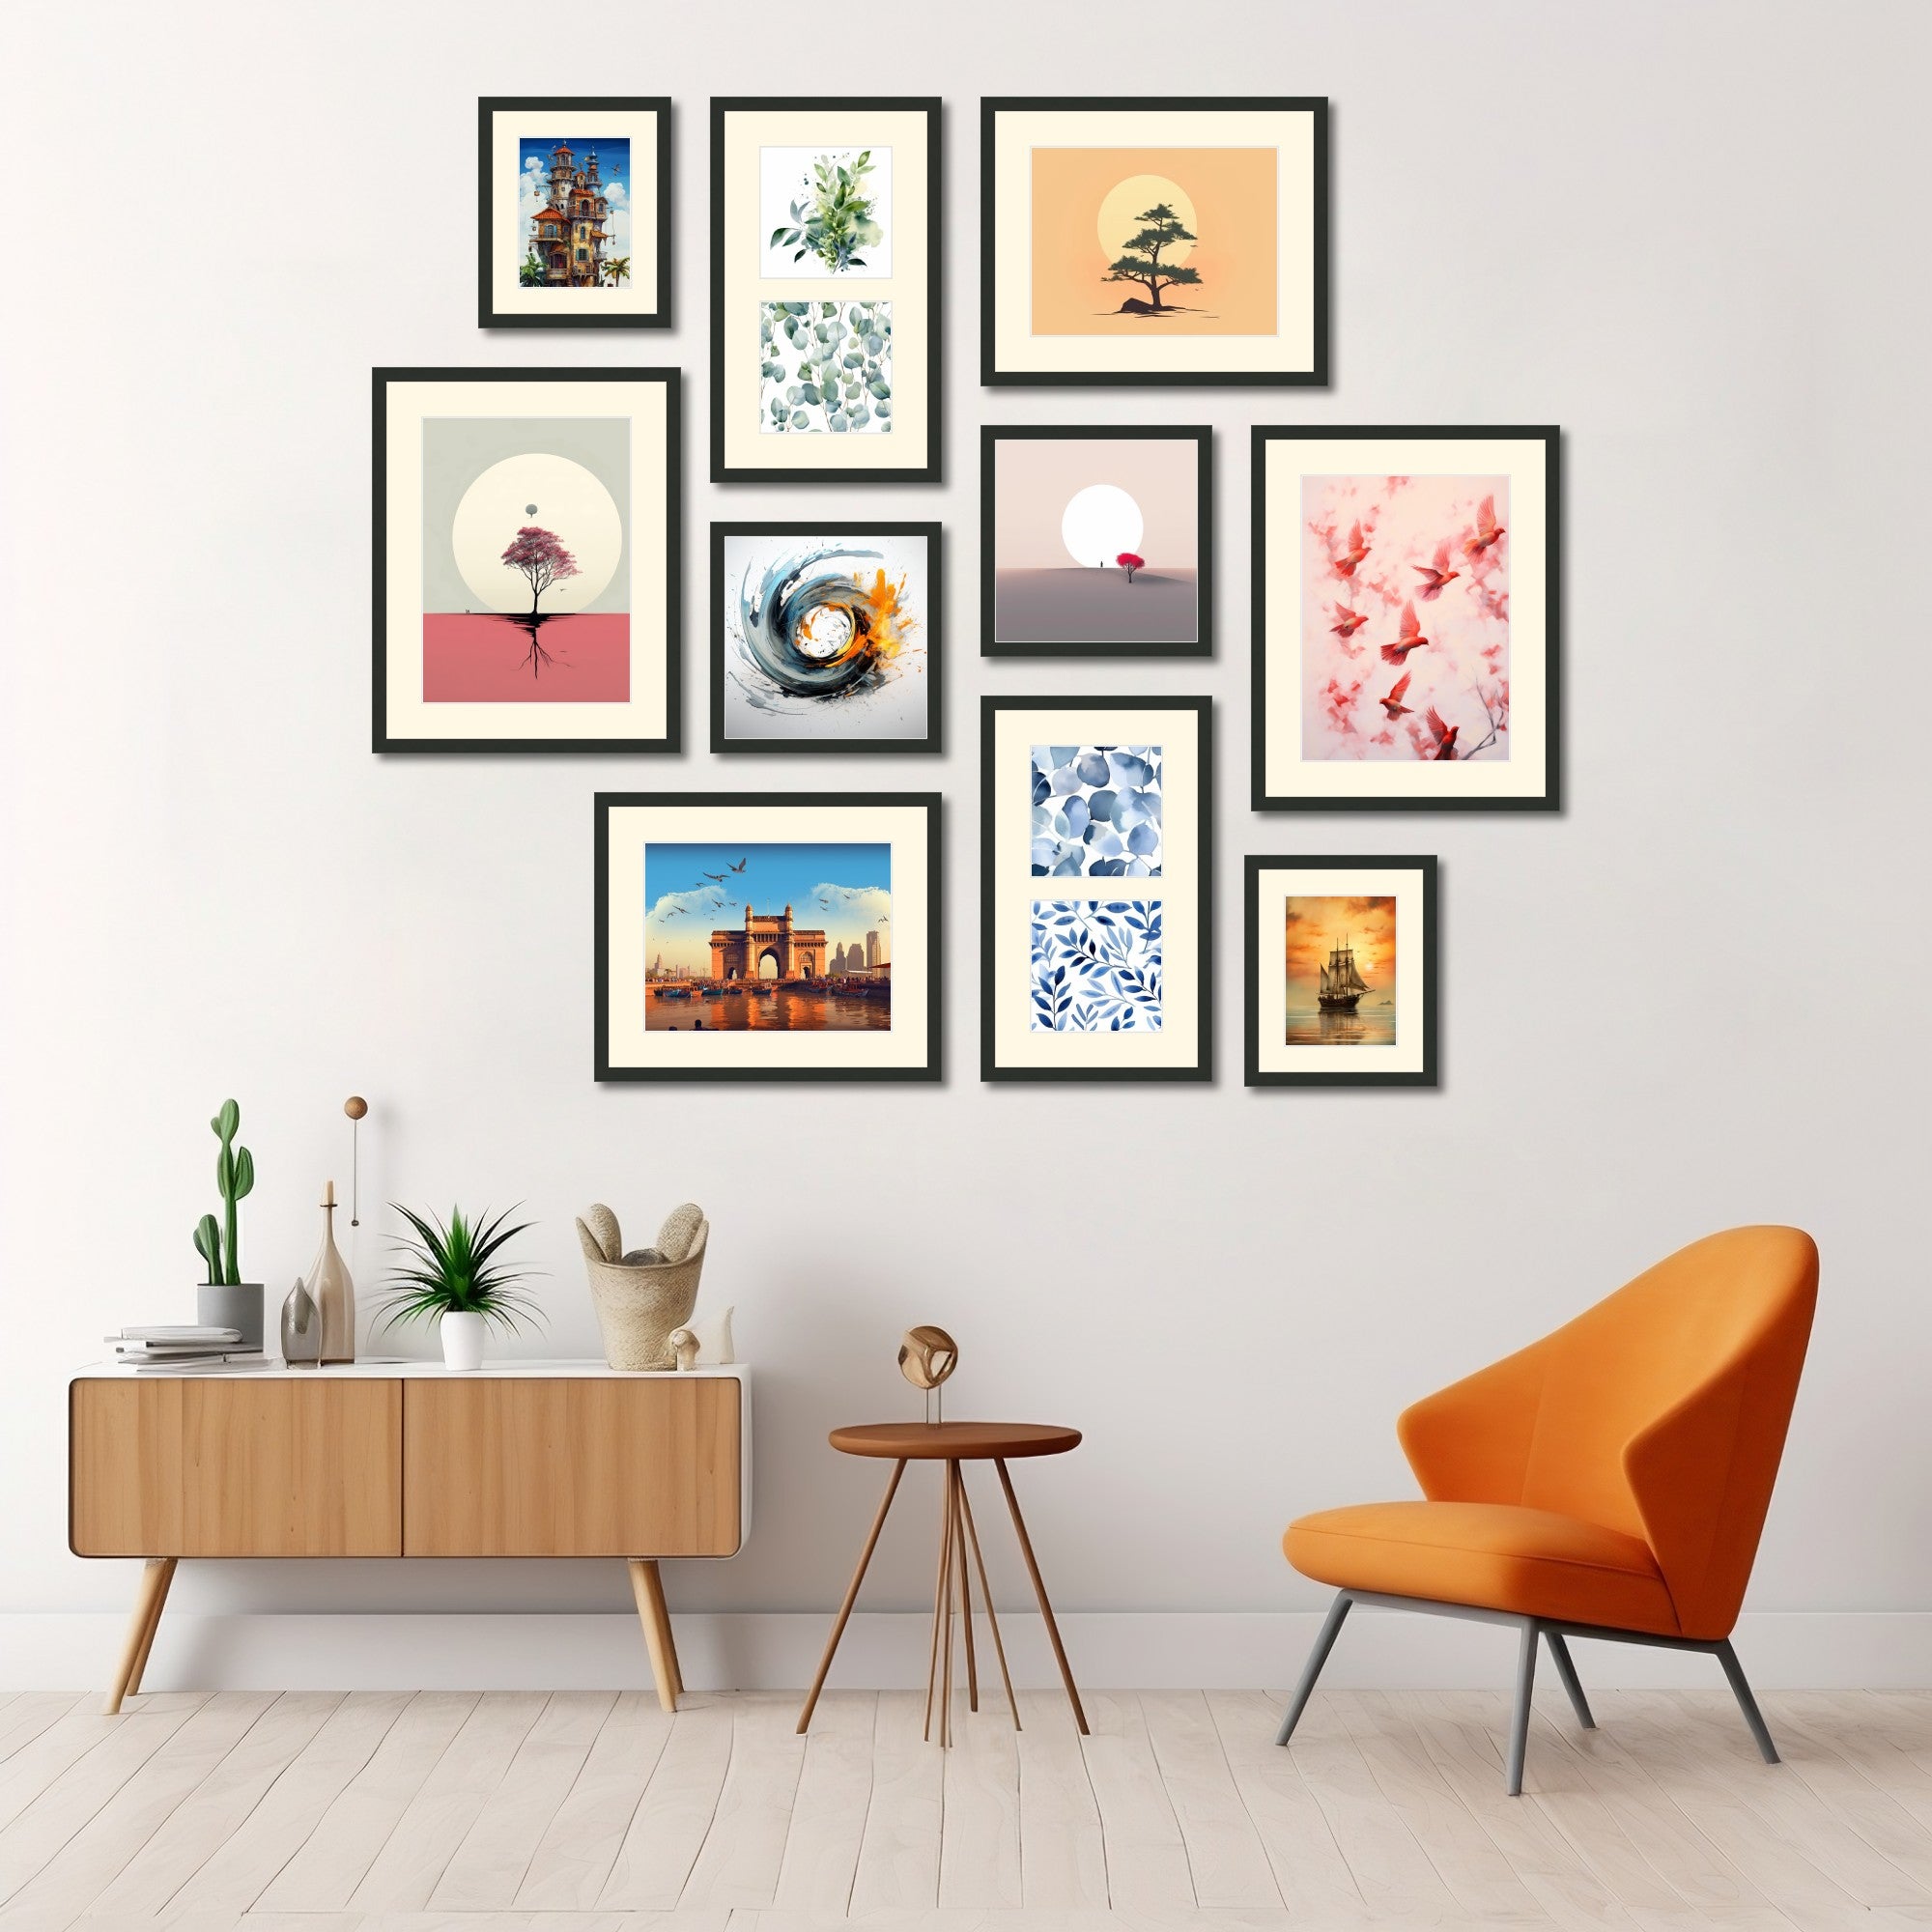 62" x 51" Gallery Wall Wooden Frame (Set of 10)